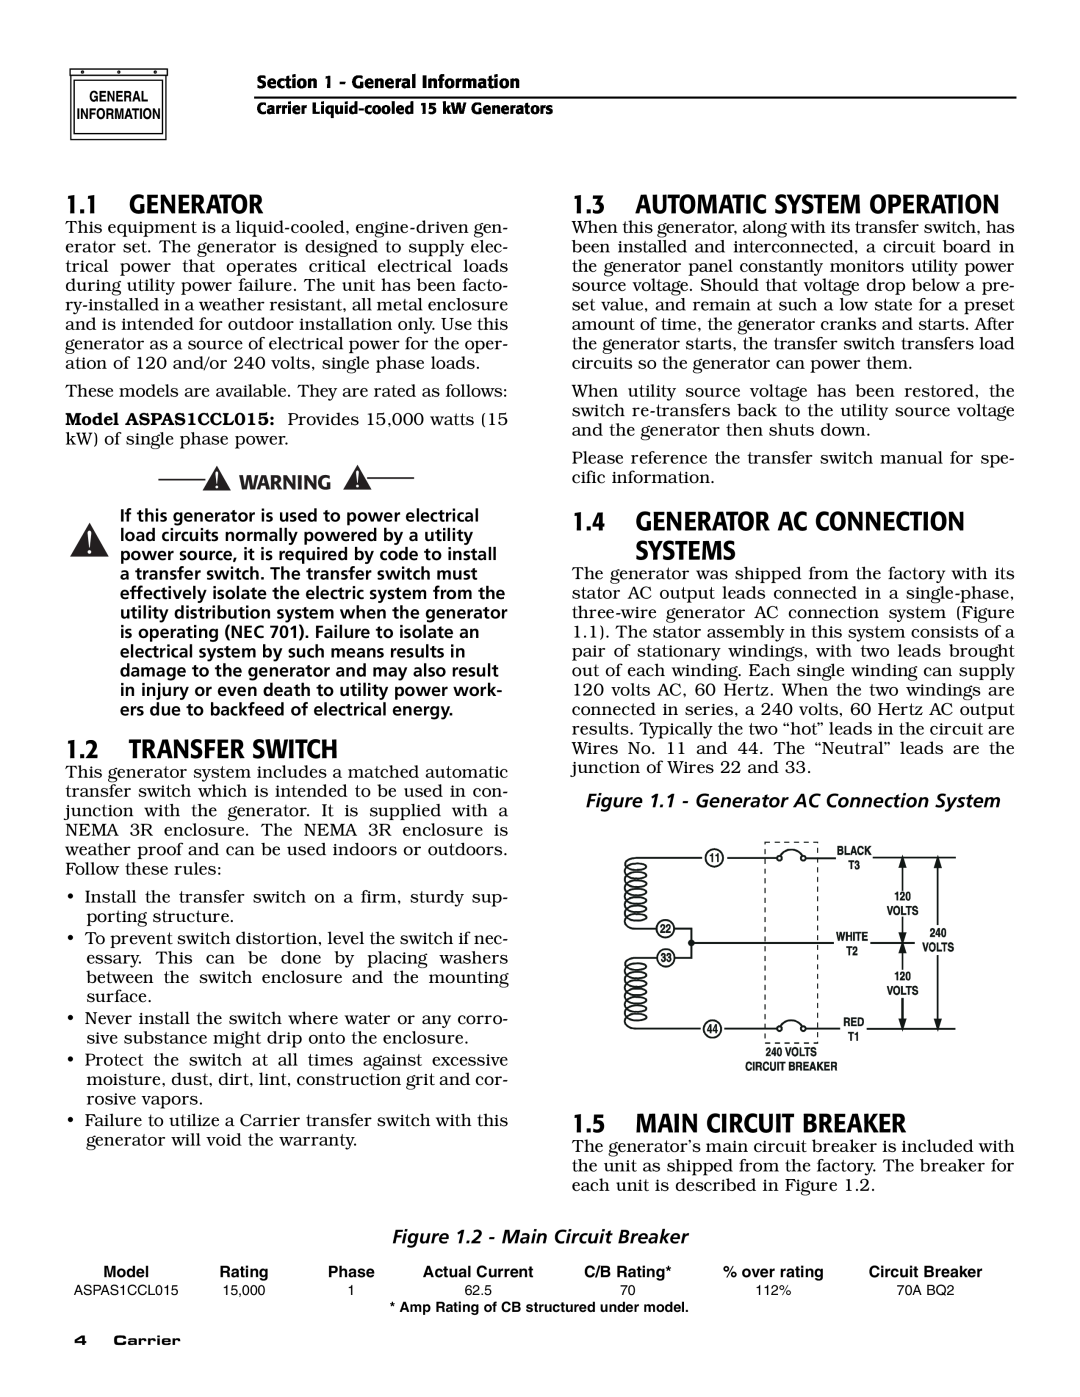 Generac ASPAS1CCL015 owner manual Transfer Switch, Automatic System Operation, Generator Ac Connection Systems 